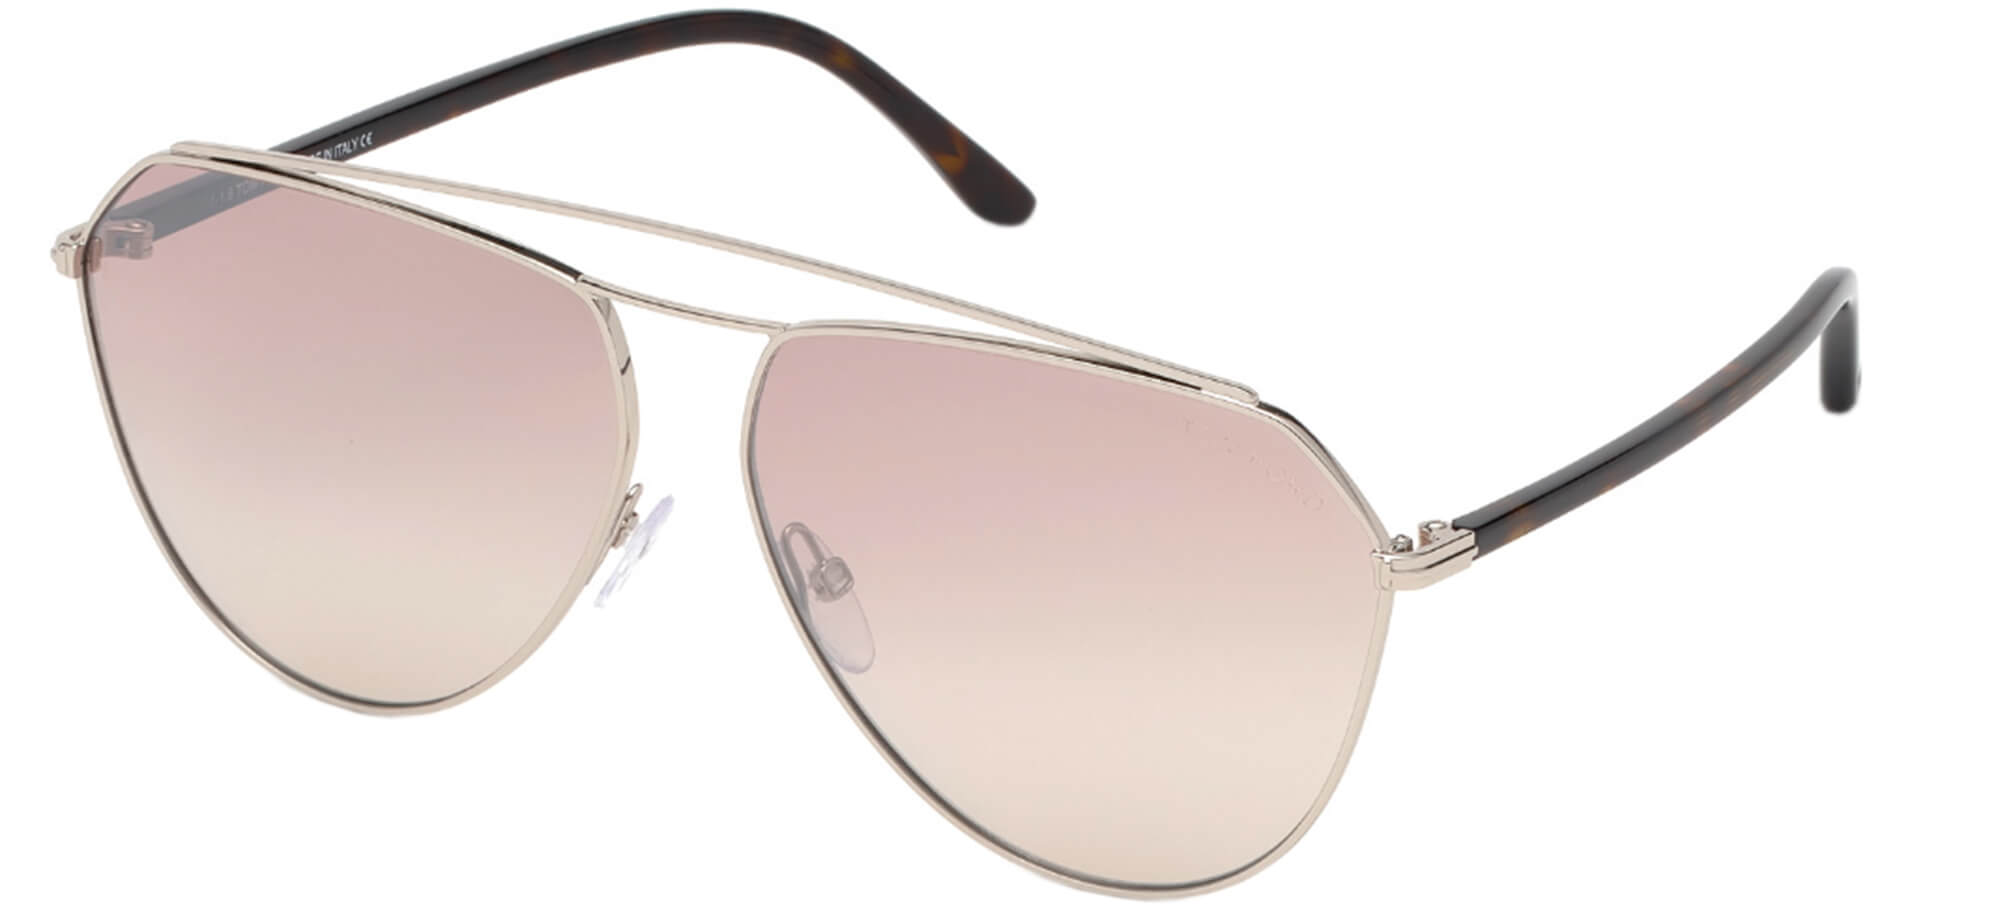 Tom FordBINX FT 0681Silver/brown Shaded (16G)